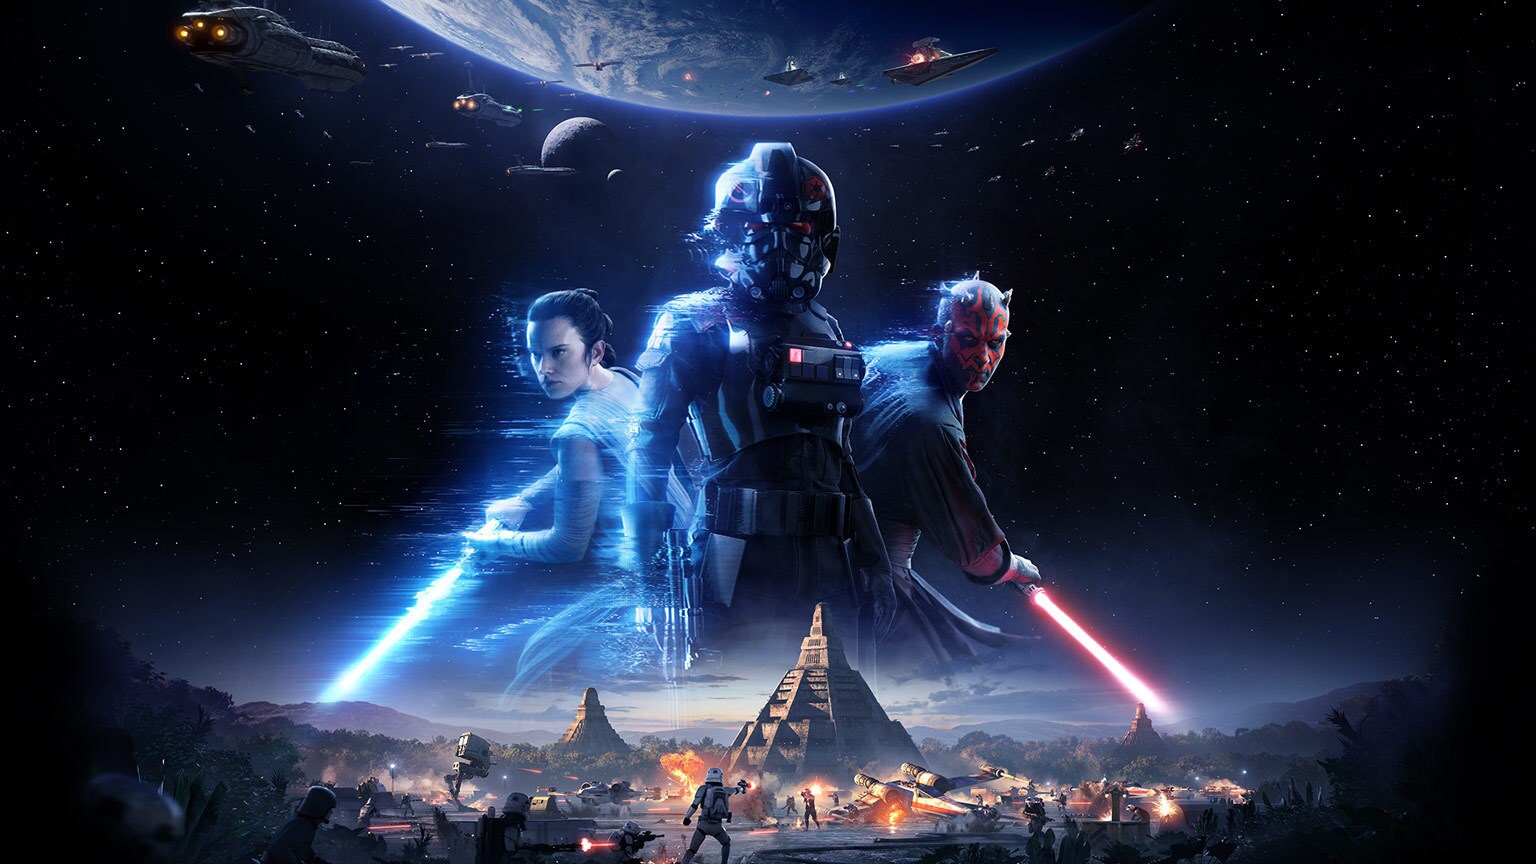 Battlefront II and More Classic Star Wars Games Arrive on EA Access, Origin Access, and Origin